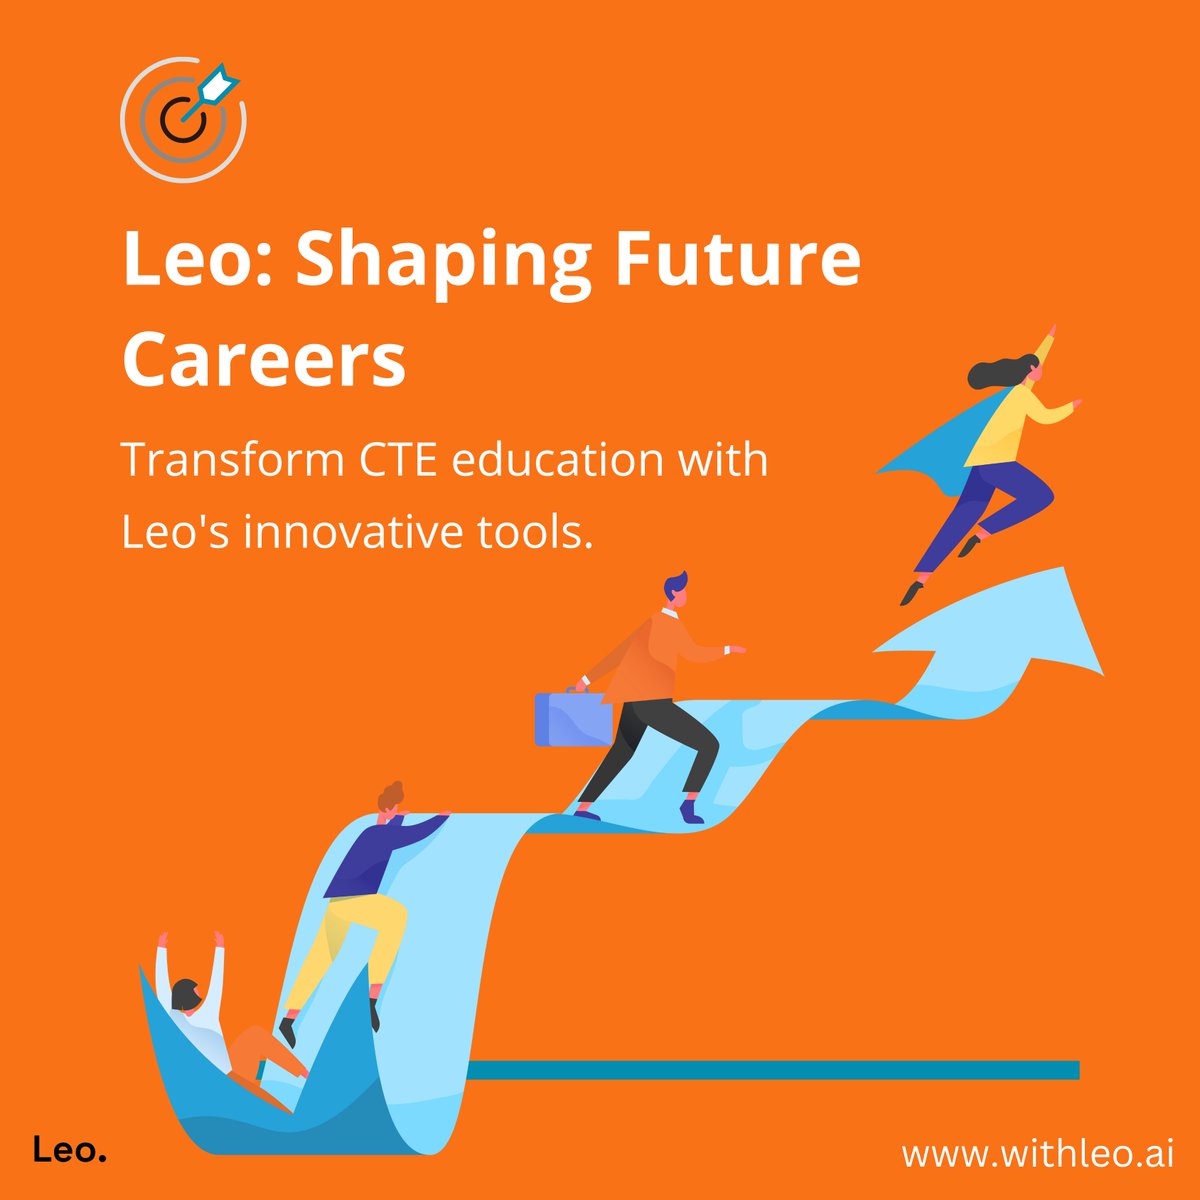 Leo, an innovative tool, empowers CTE teachers to prepare students for future careers by integrating real-world scenarios and providing industry-relevant feedback. Explore Leo's capabilities at withleo.ai #AI #edtech #education #teaching #AIinEducation #TeacherTools